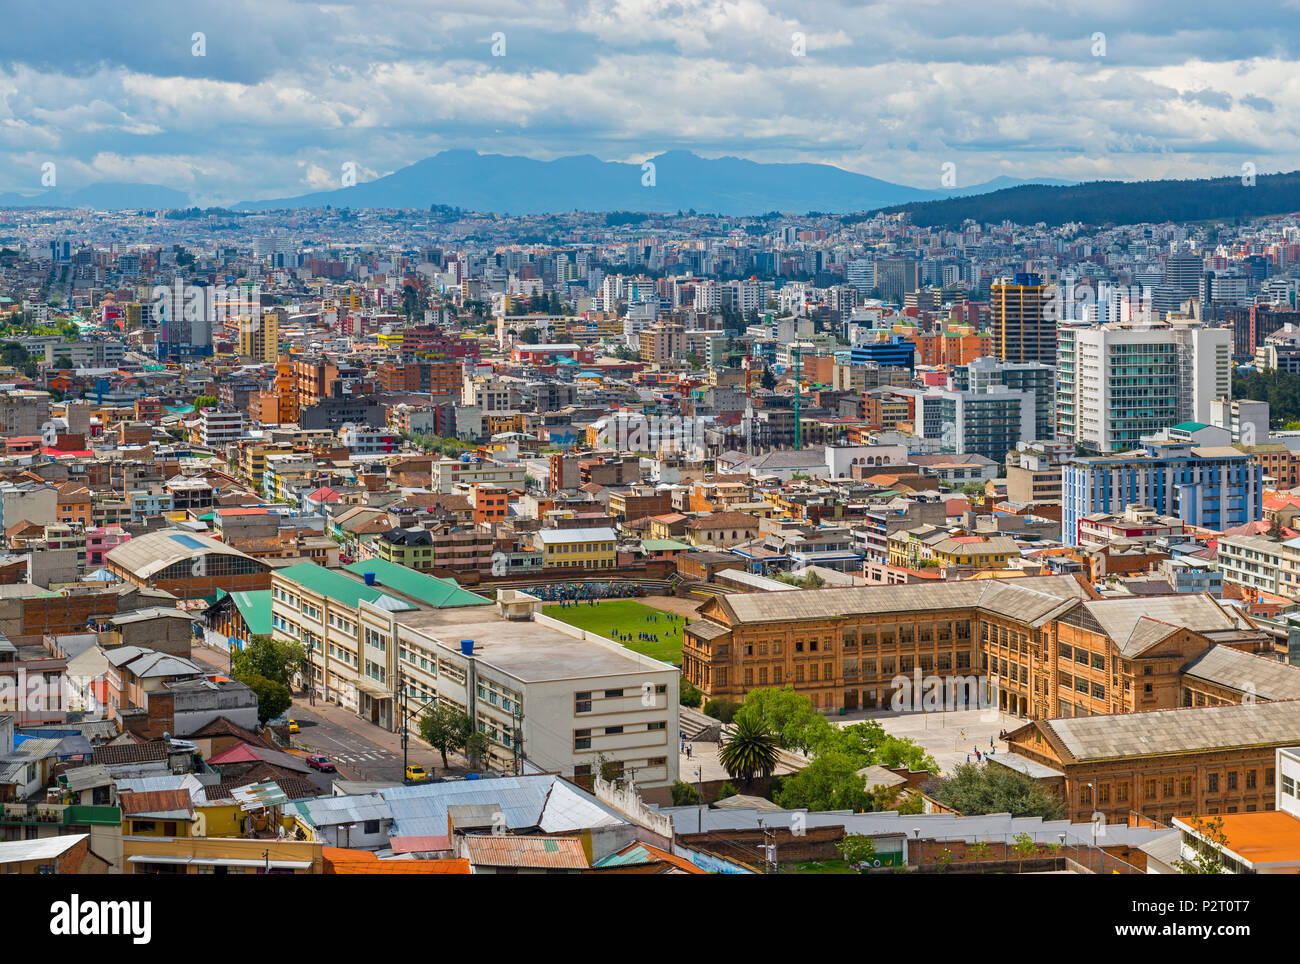 The modern part of Quito city with its skyscrapers located in the Andes mountain range, Ecuador, South America. Stock Photo